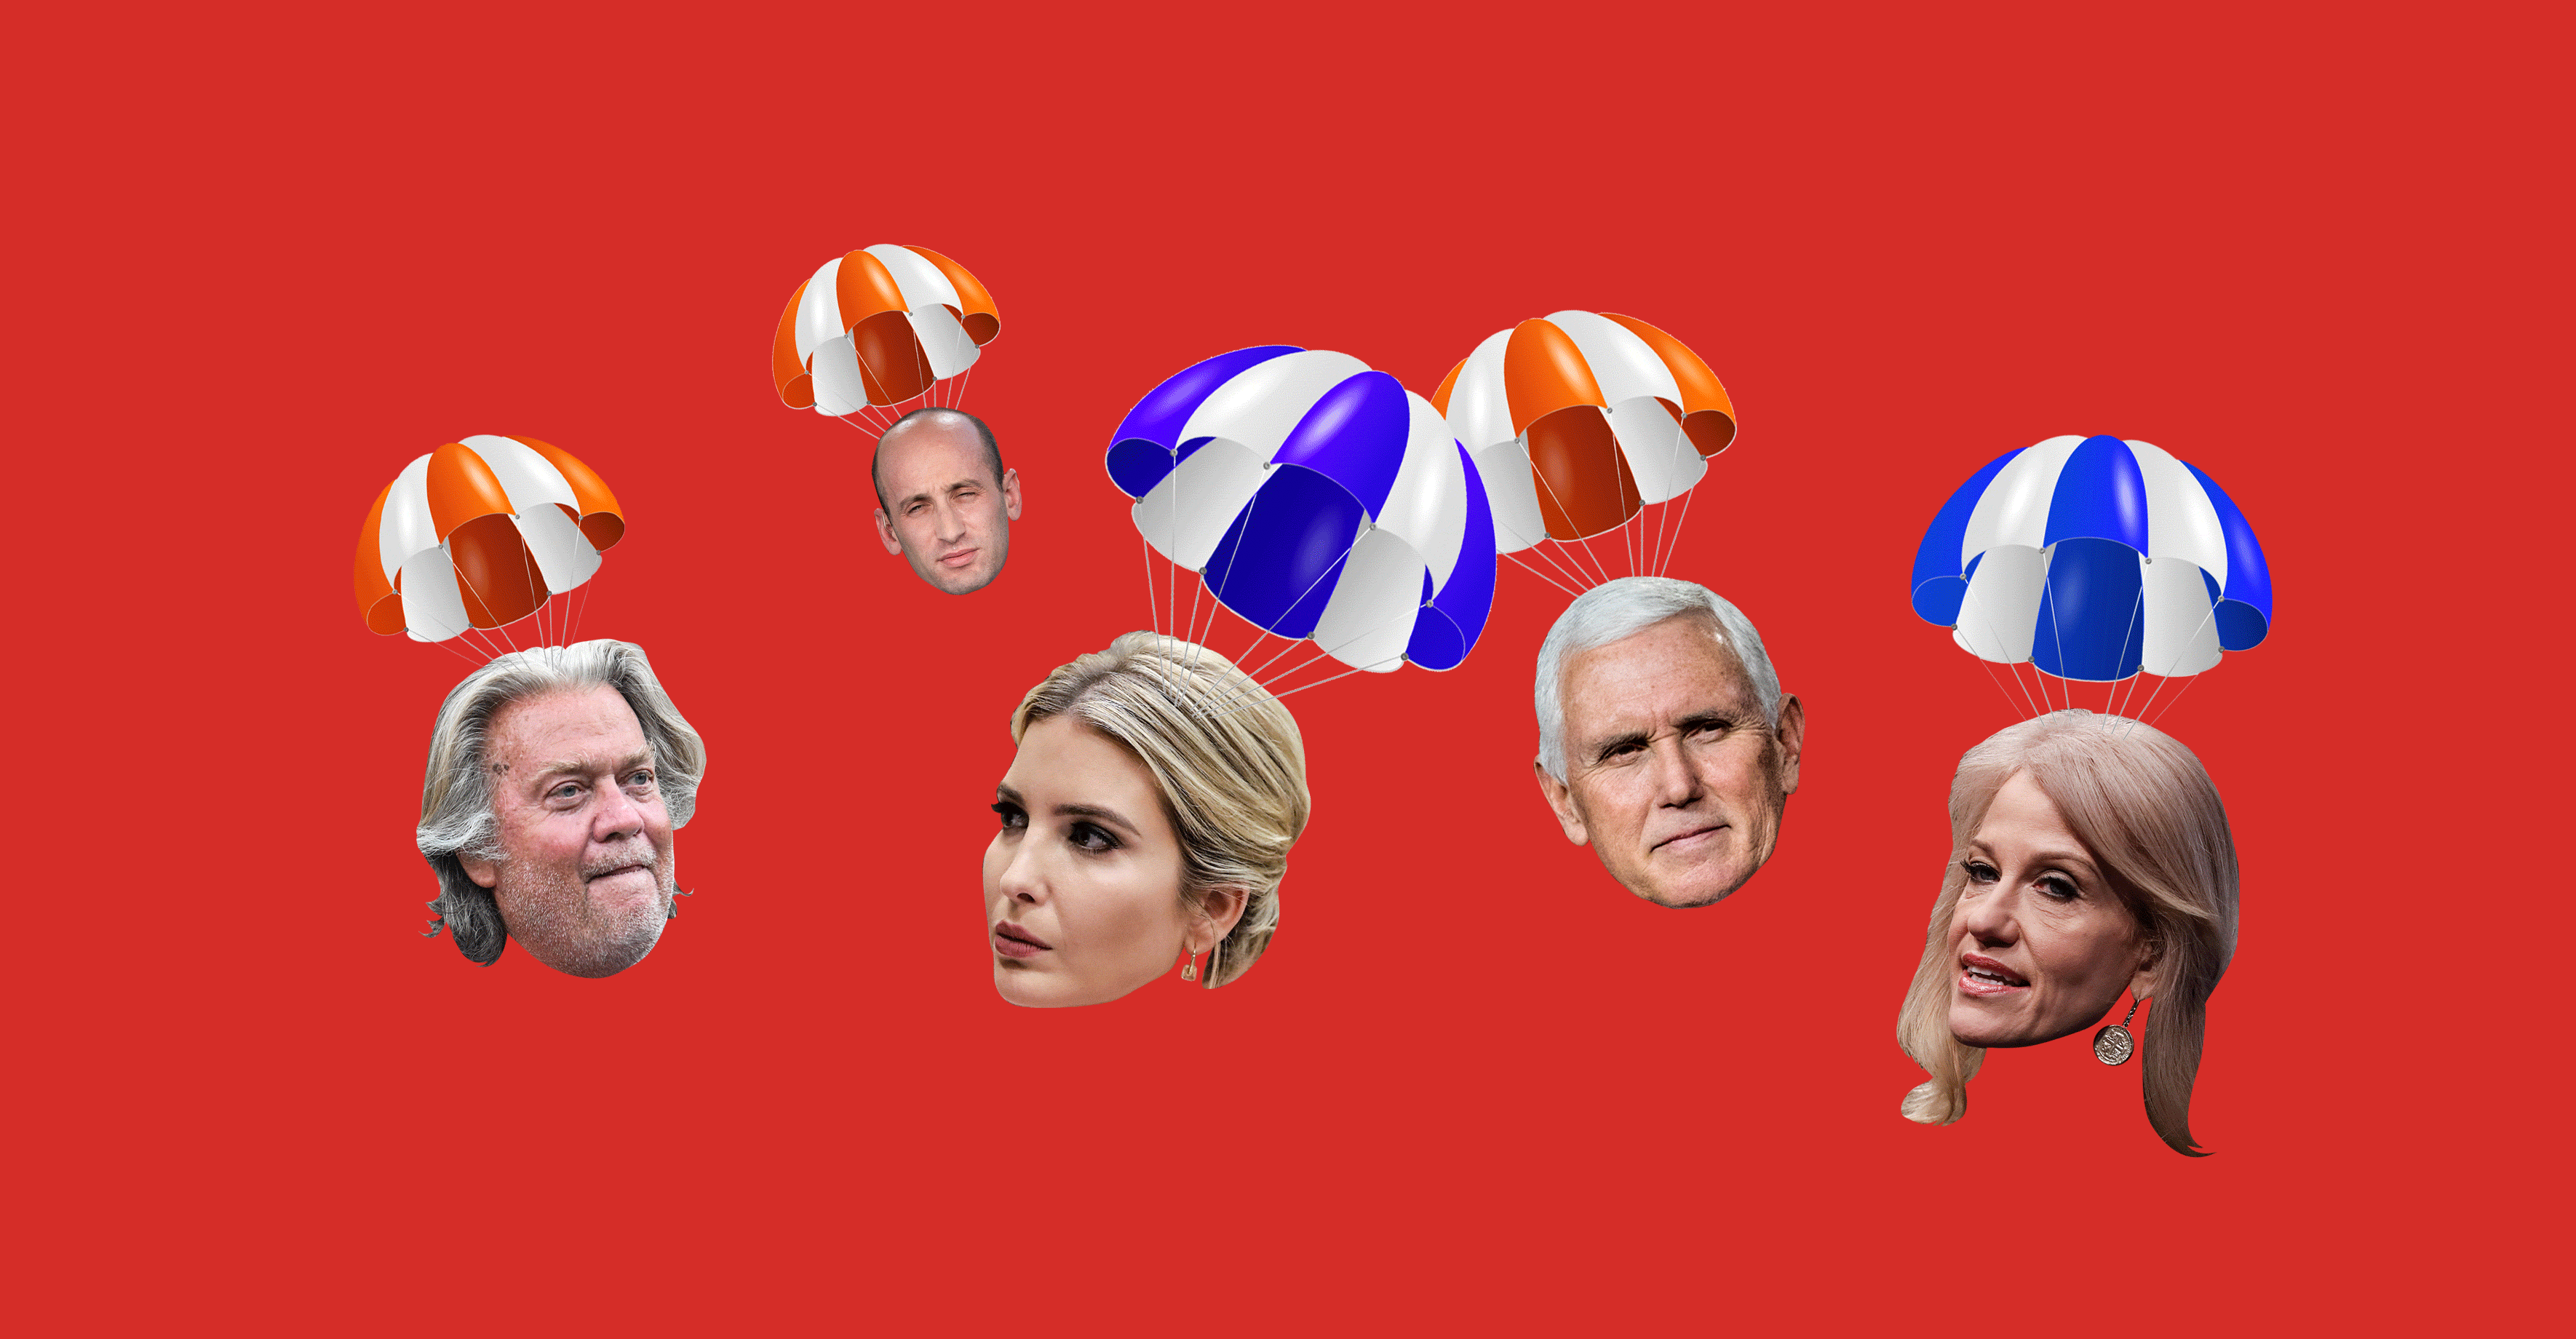 The heads of Trump administration officials attached to parachutes.